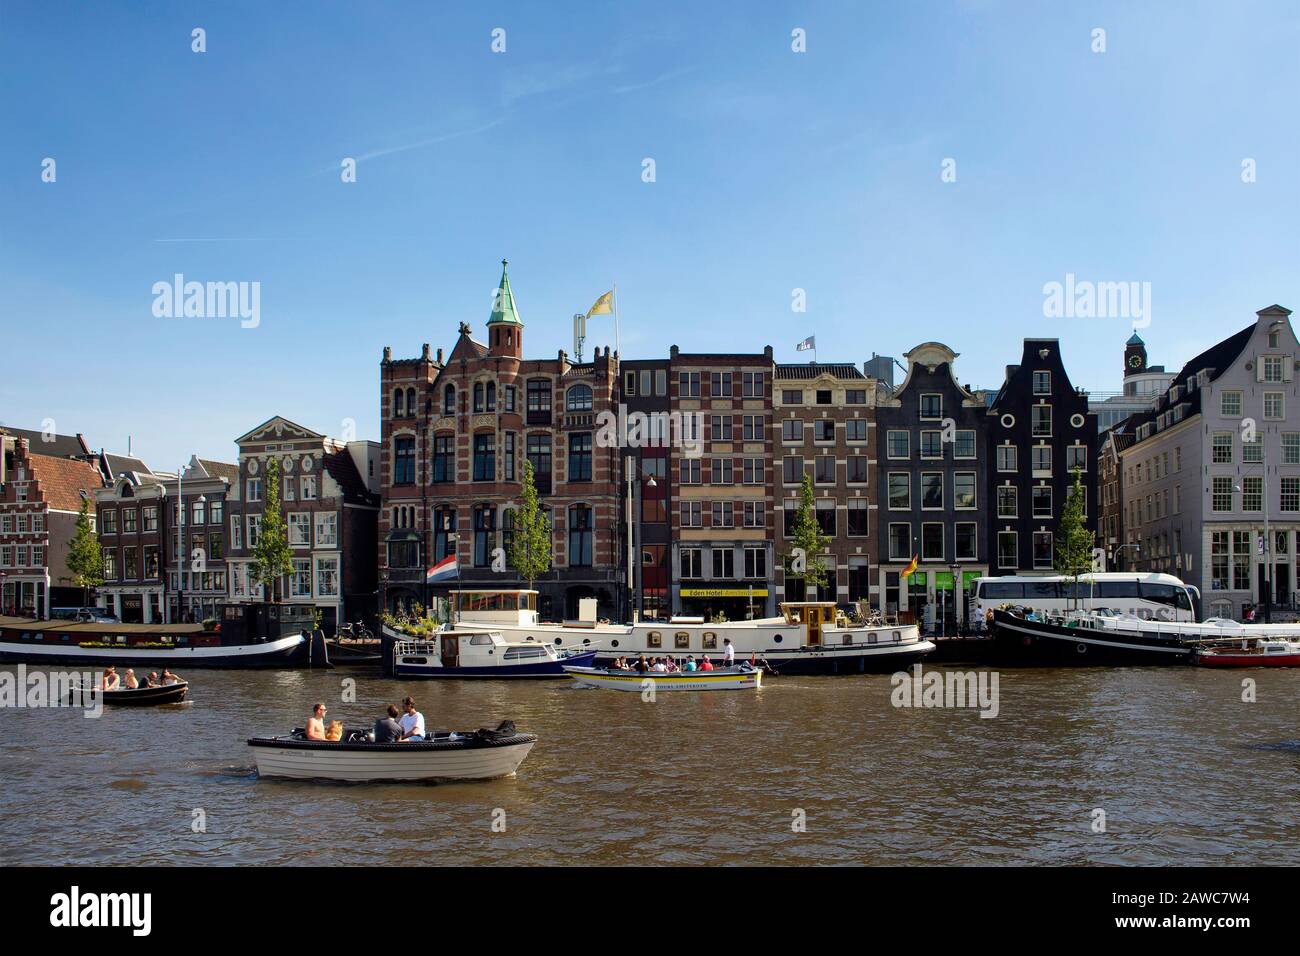 View of people riding open boats in Amstel river doing canal cruise tours. Historical, traditional and typical buildings are in the background. It is Stock Photo